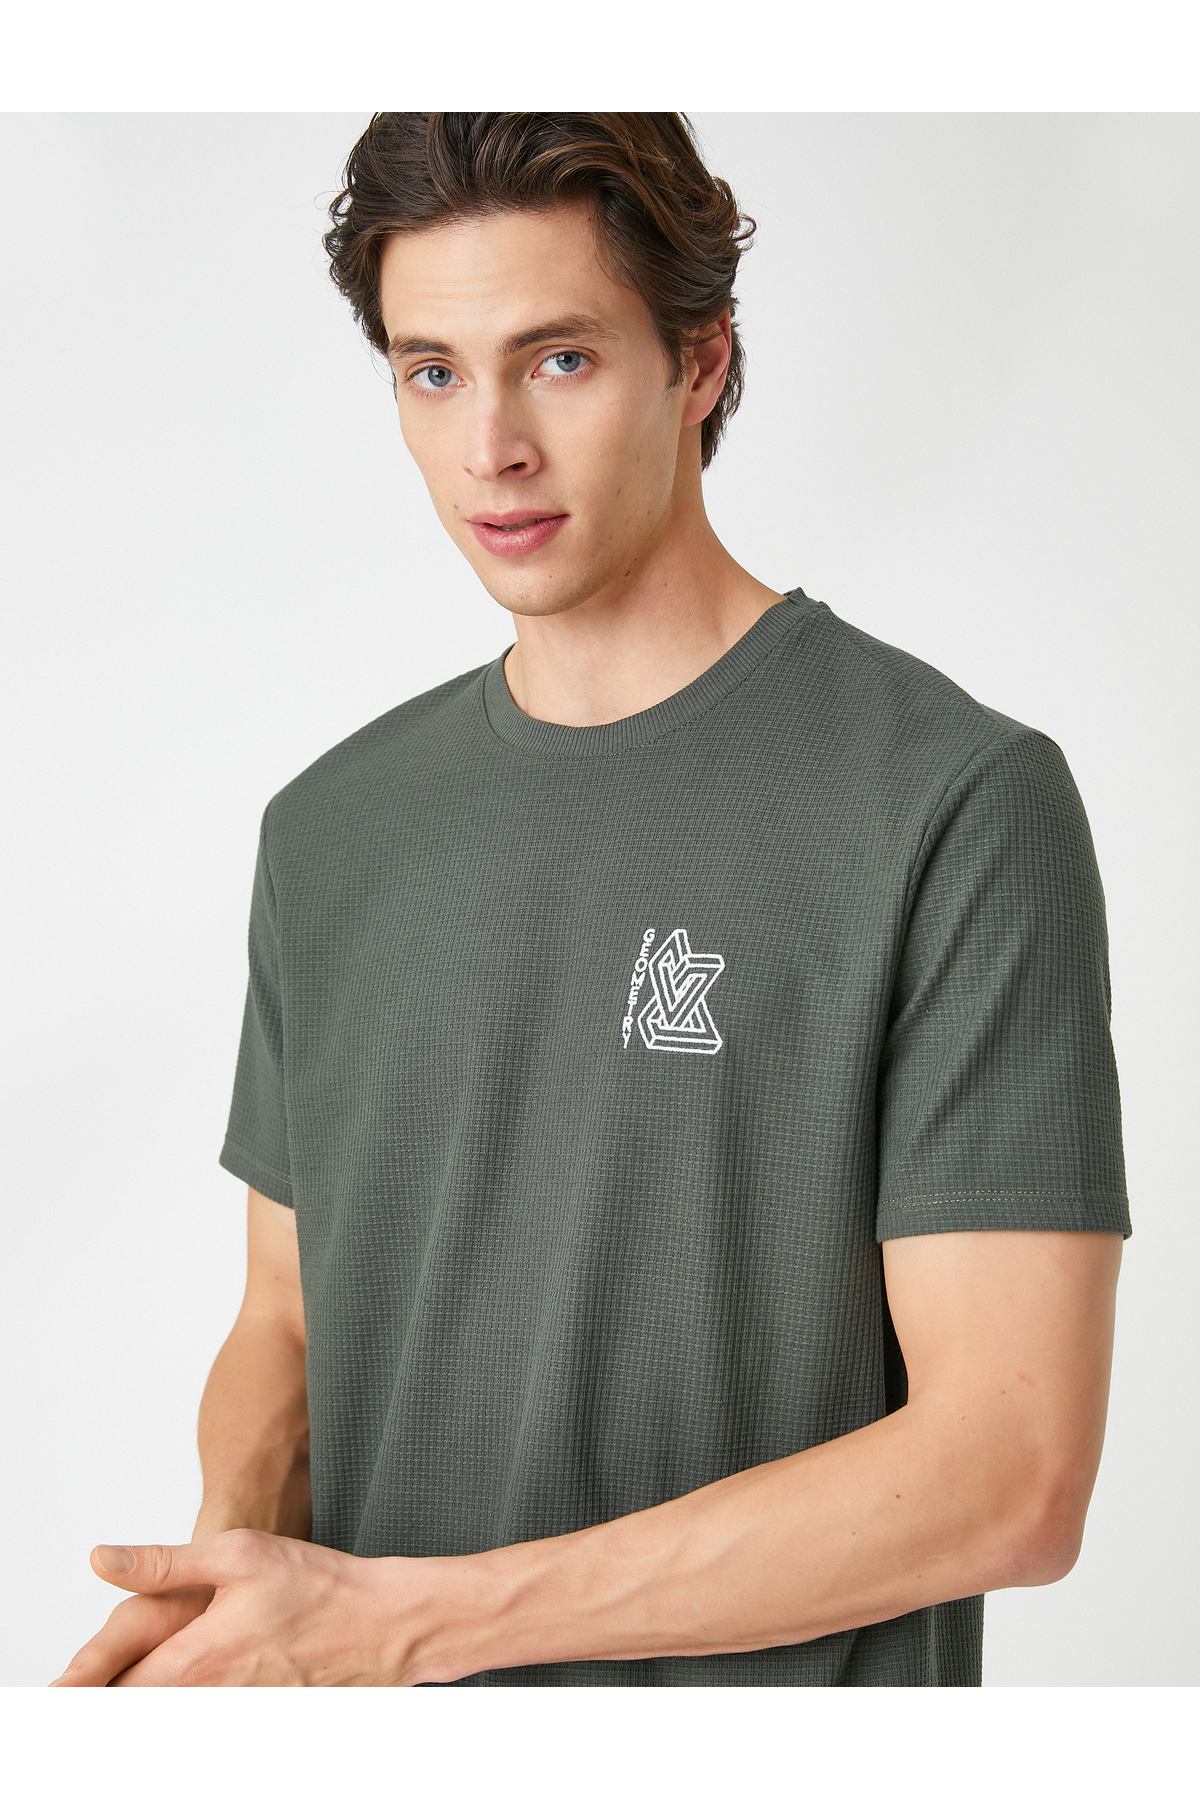 Koton Textured T-Shirt with Geometric Embroidered Short Sleeves Crew Neck.